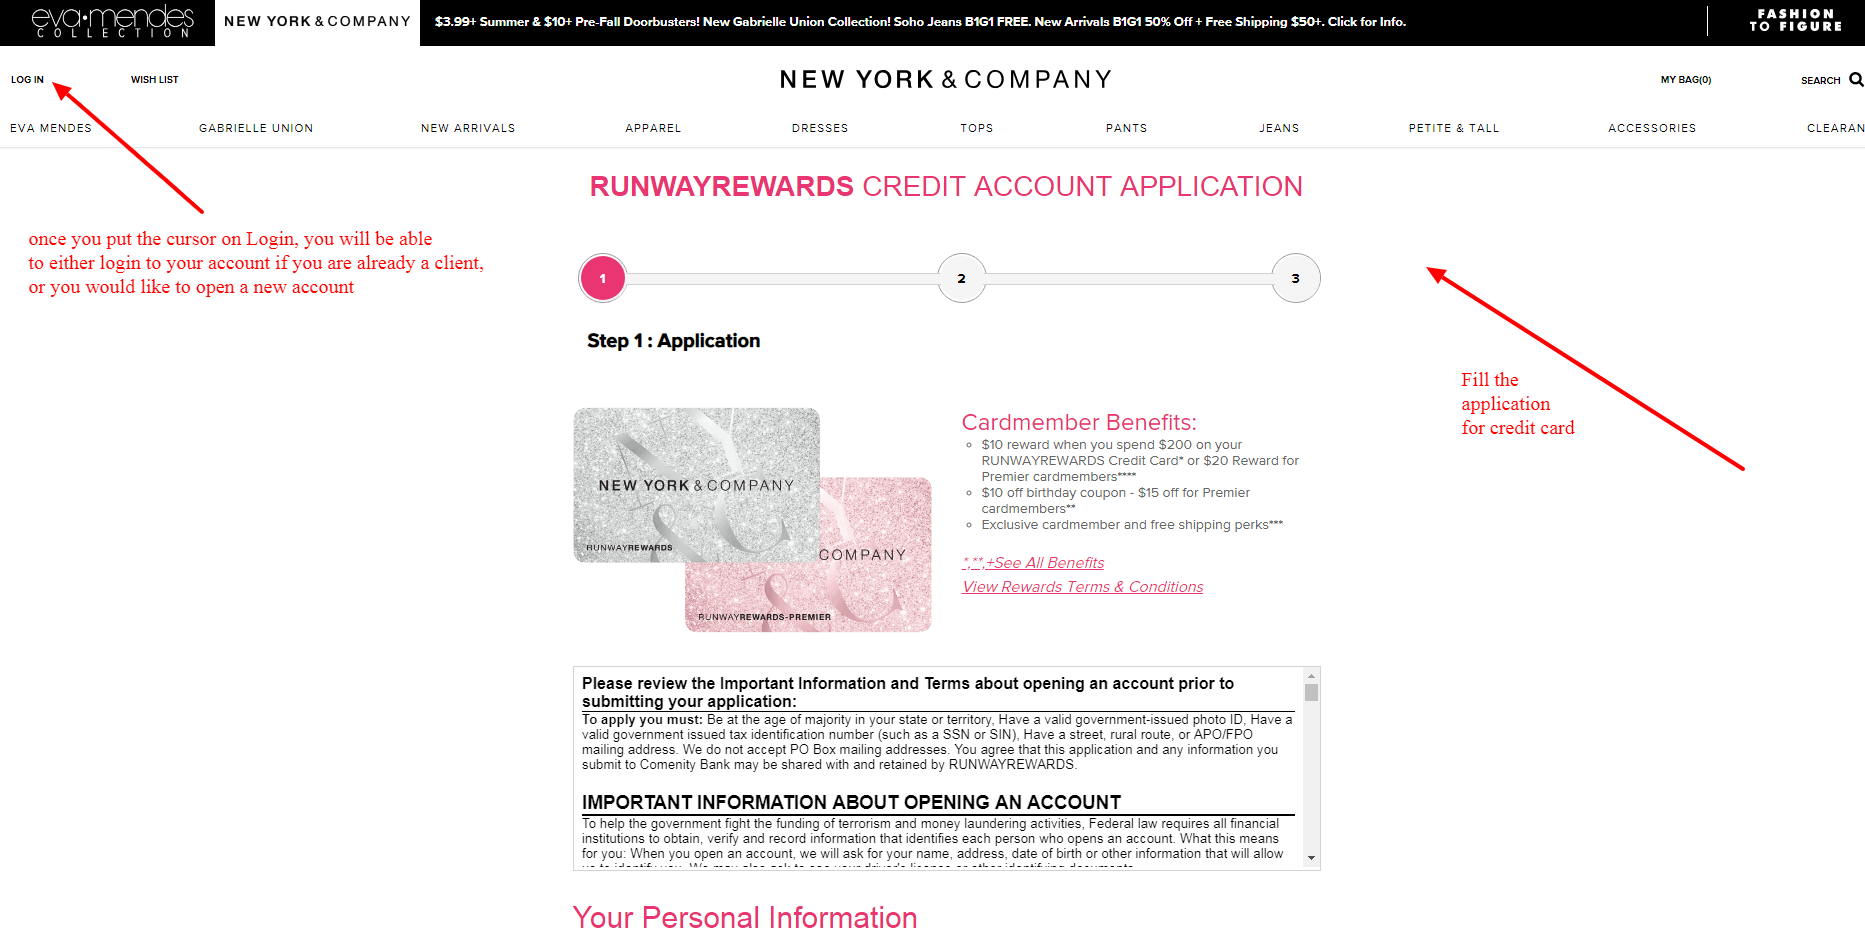 log in to your new york company credit card account